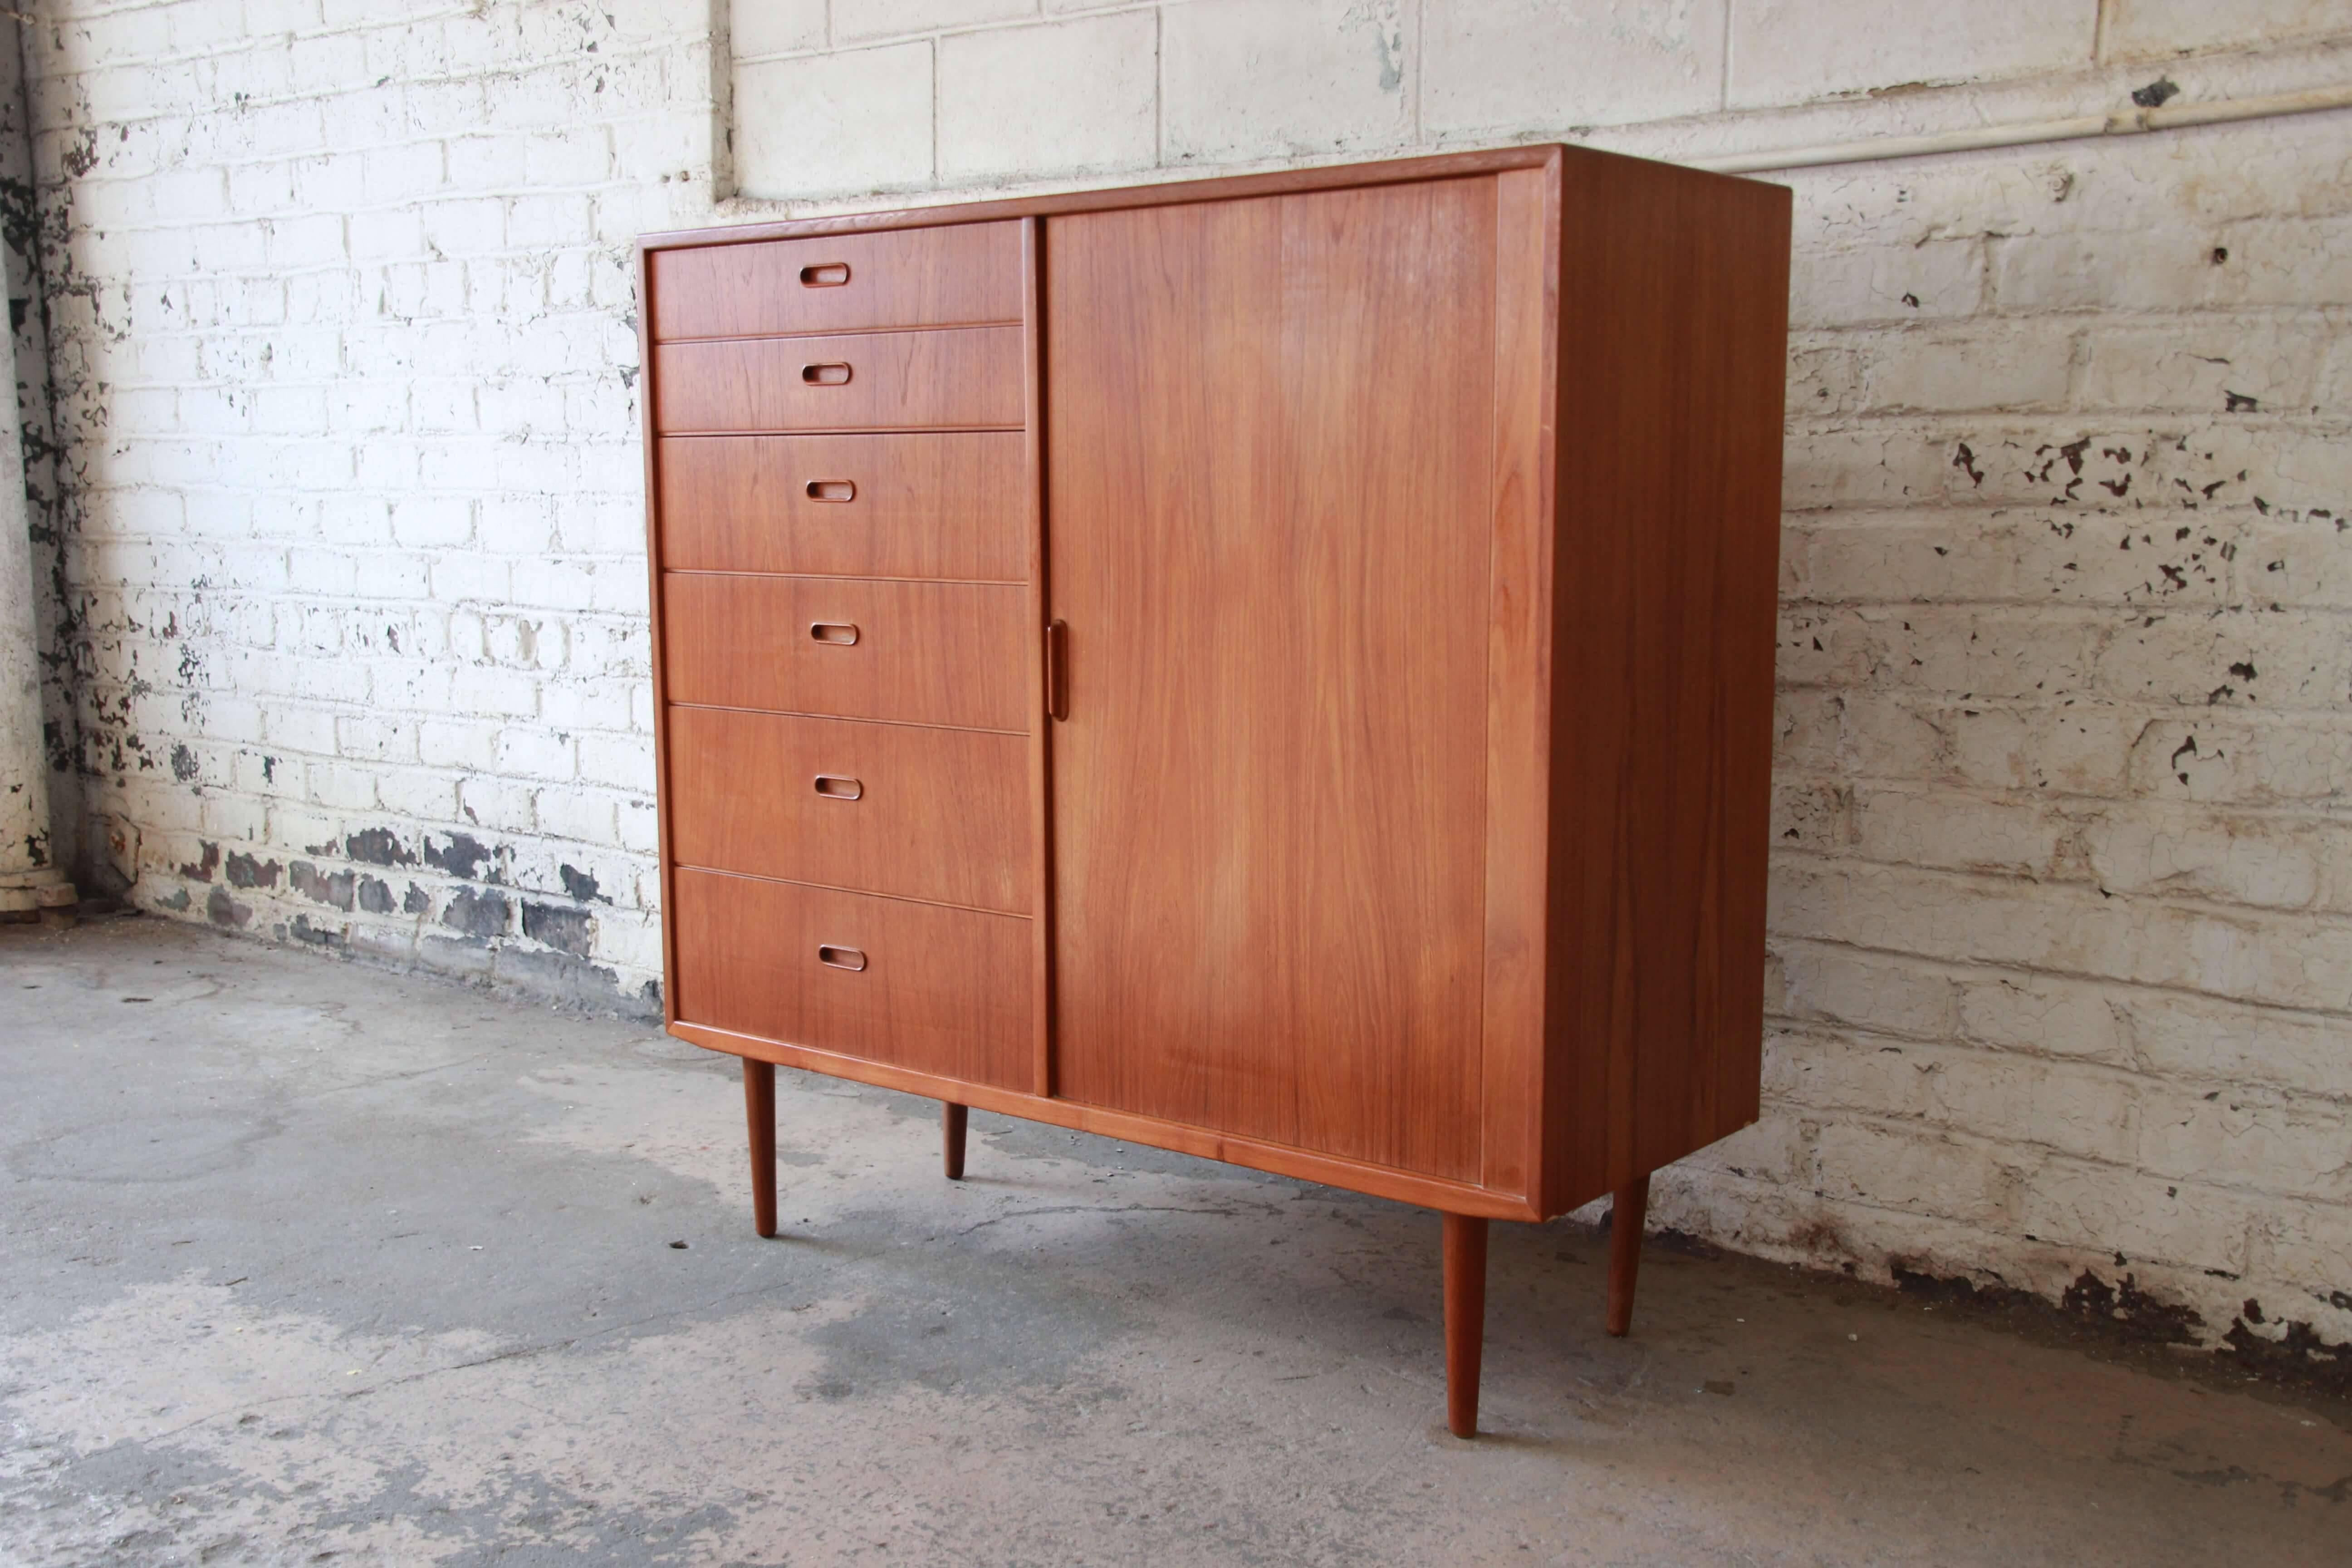 Offering a fantastic Danish modern teak gentlemen's chest by Falster of Denmark. This stunning chest offers six graduated drawers on the left side with nice sculpted pulls. The right side has a smooth sliding tambour door that open up to six